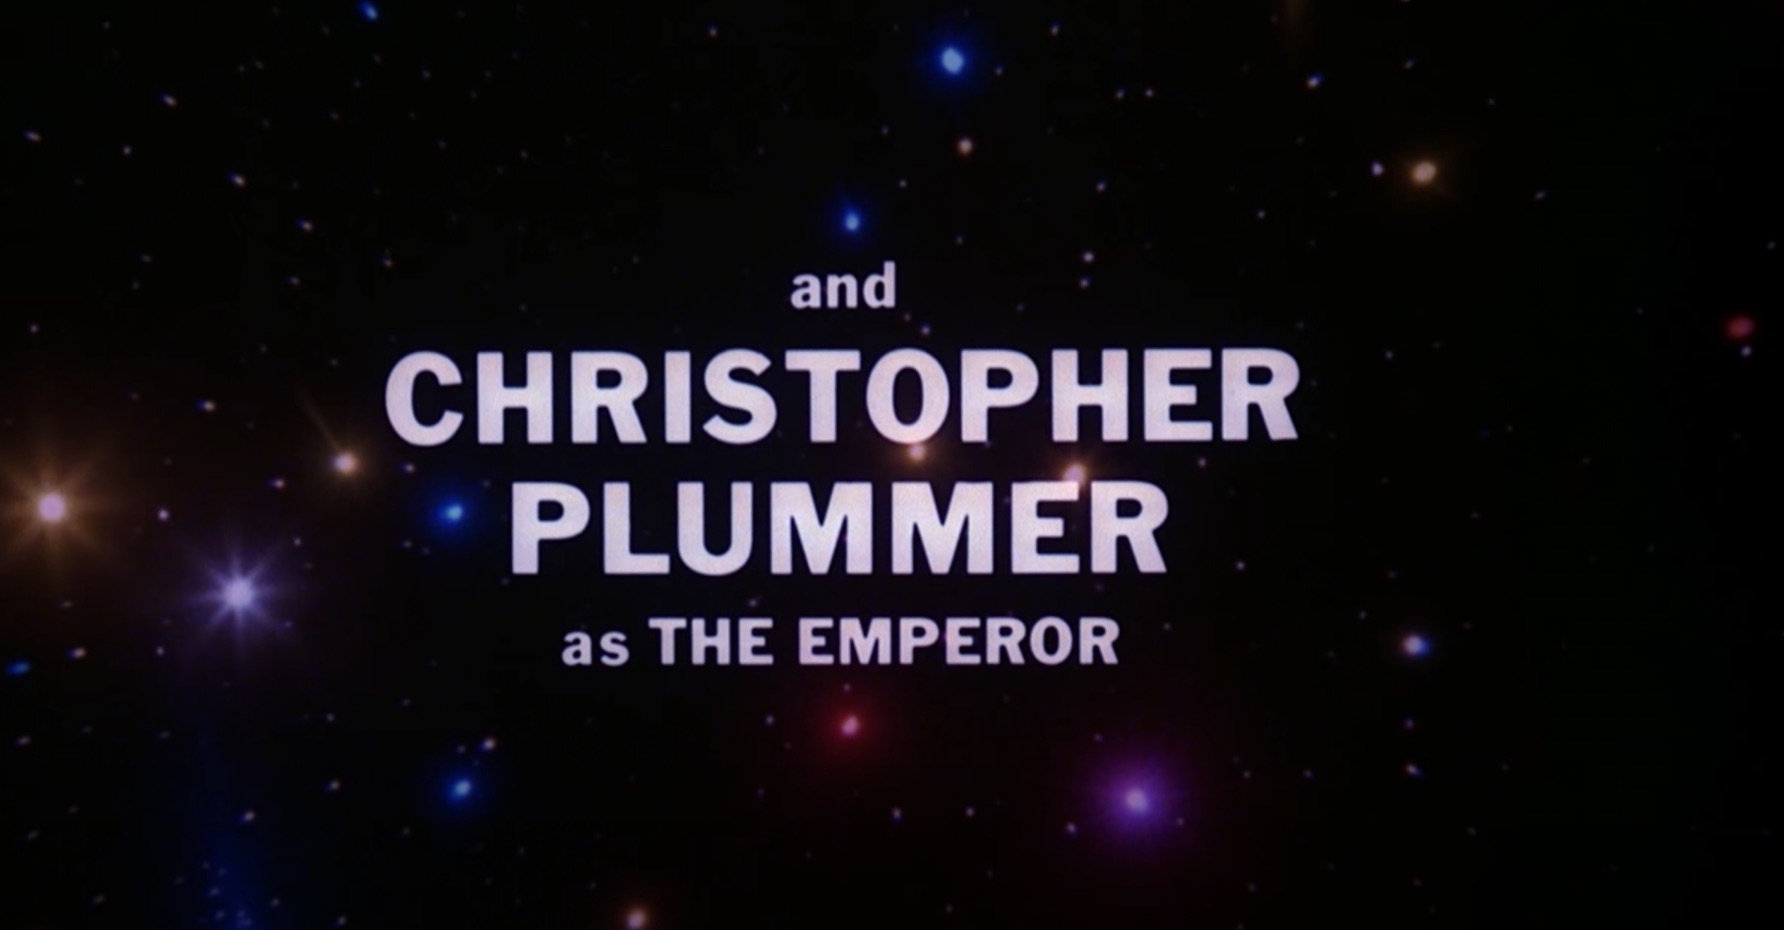 image from the opening credits of the 1979 space opera movie "Starcrash." In white lettering, against a dark and starry space background, reads: "and CHRISTOPHER PLUMMER as THE EMPEROR 